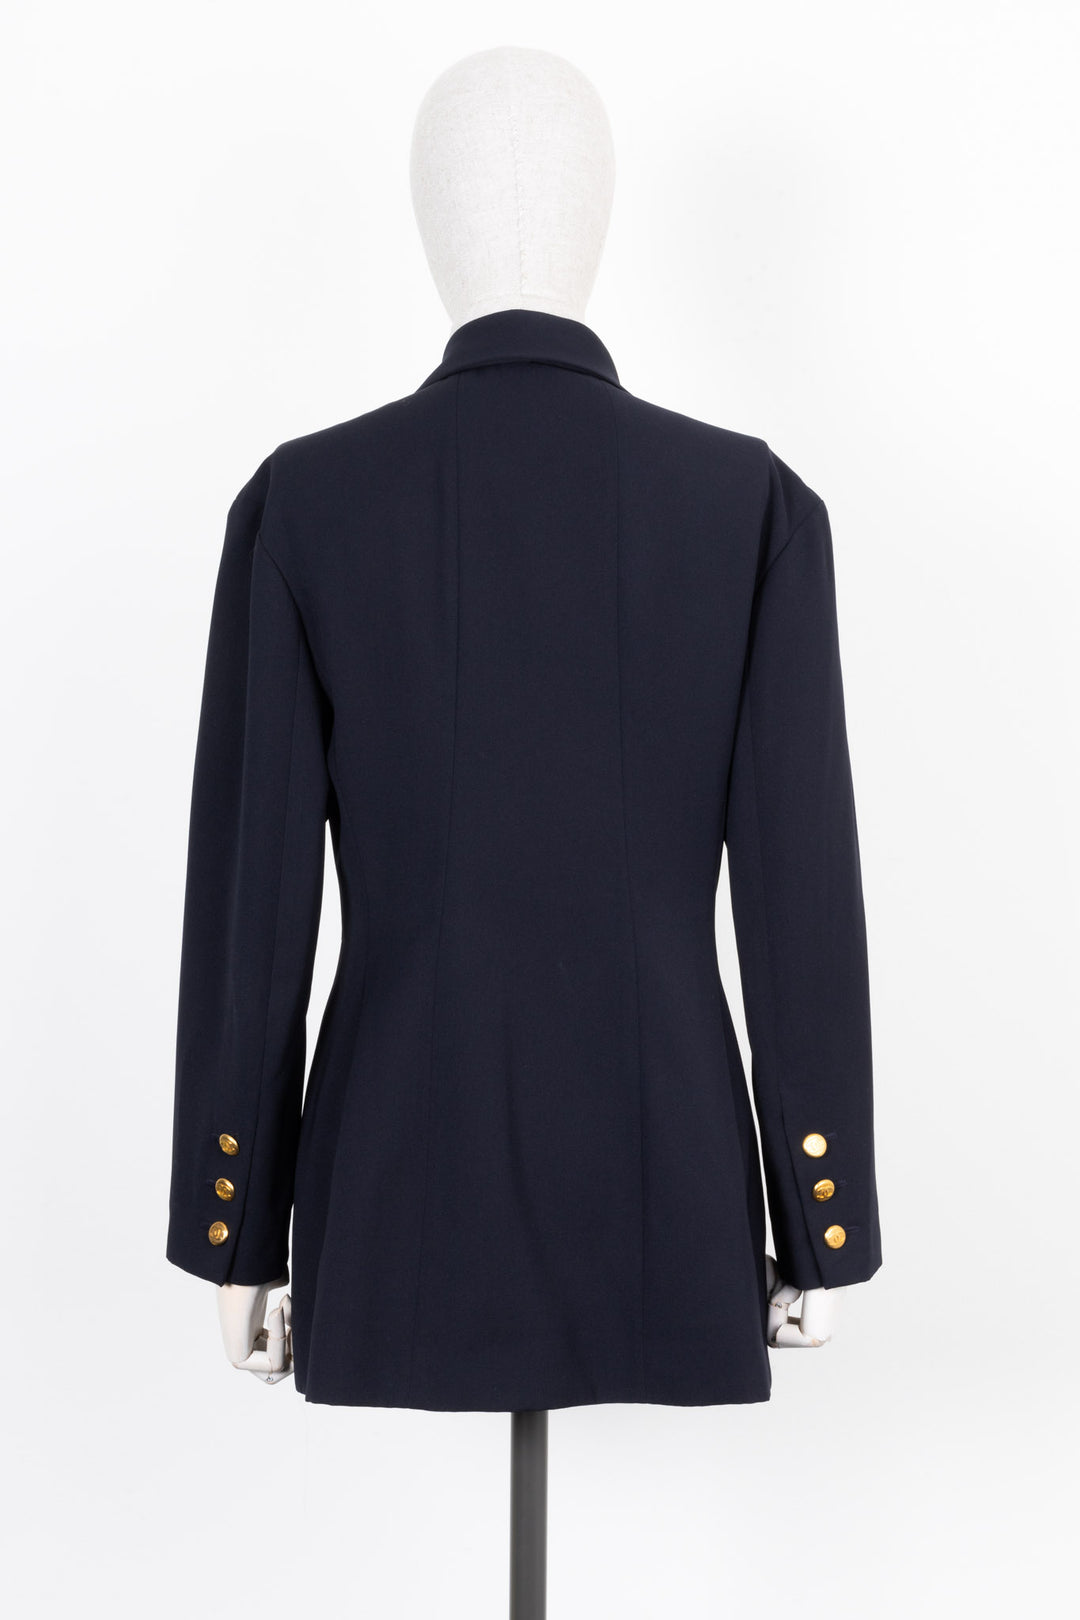 CHANEL Jacket with Gold Buttons Cotton Navy